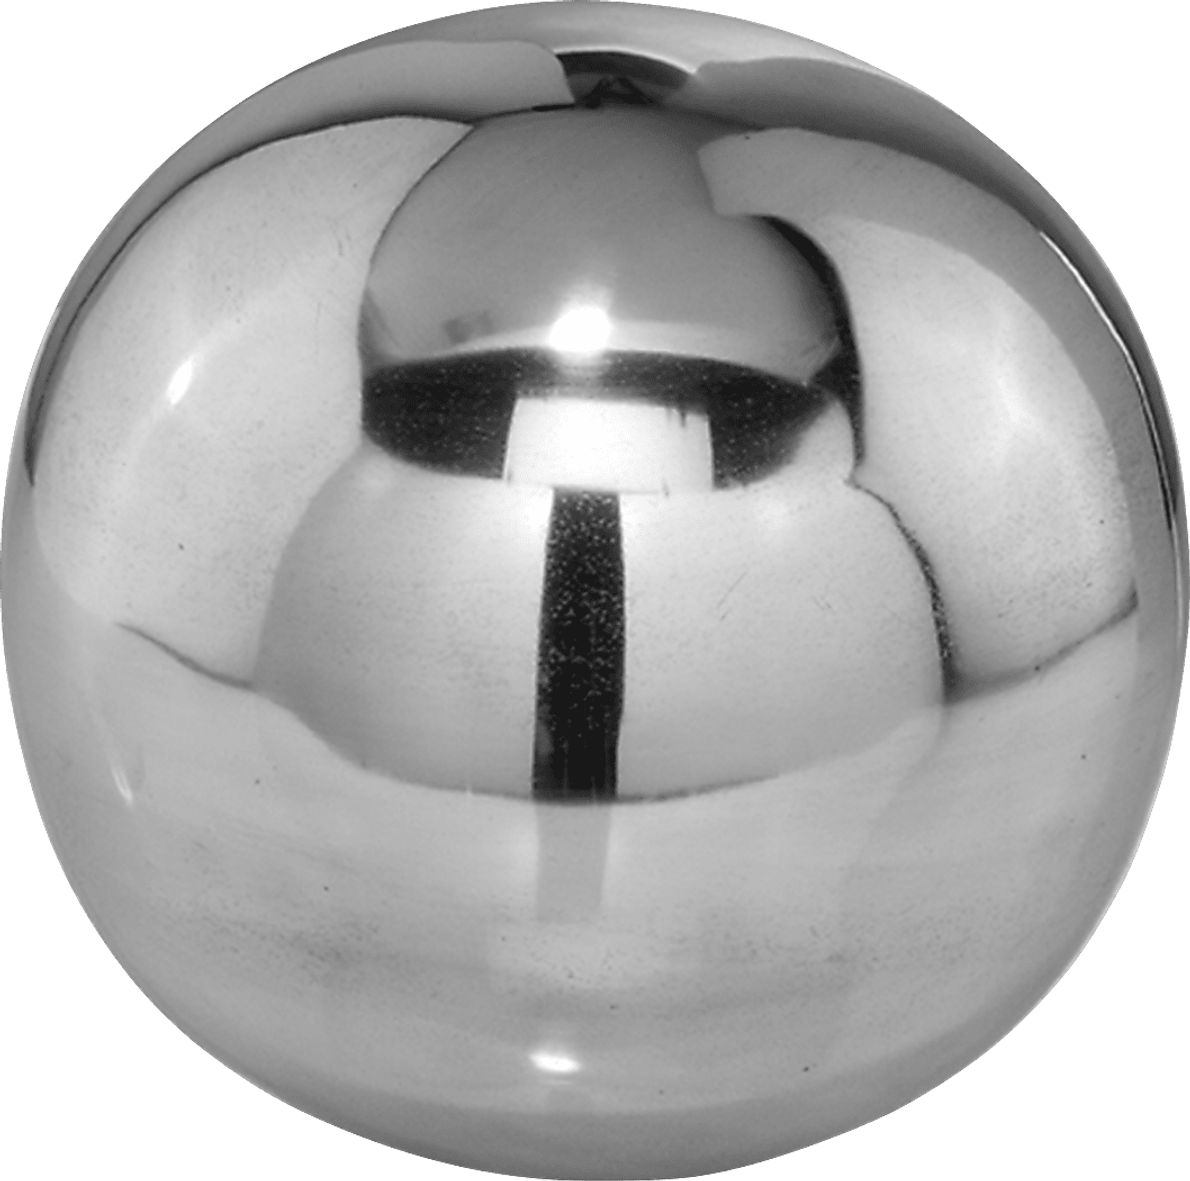 Polished Bola Silver 8 in. Sphere